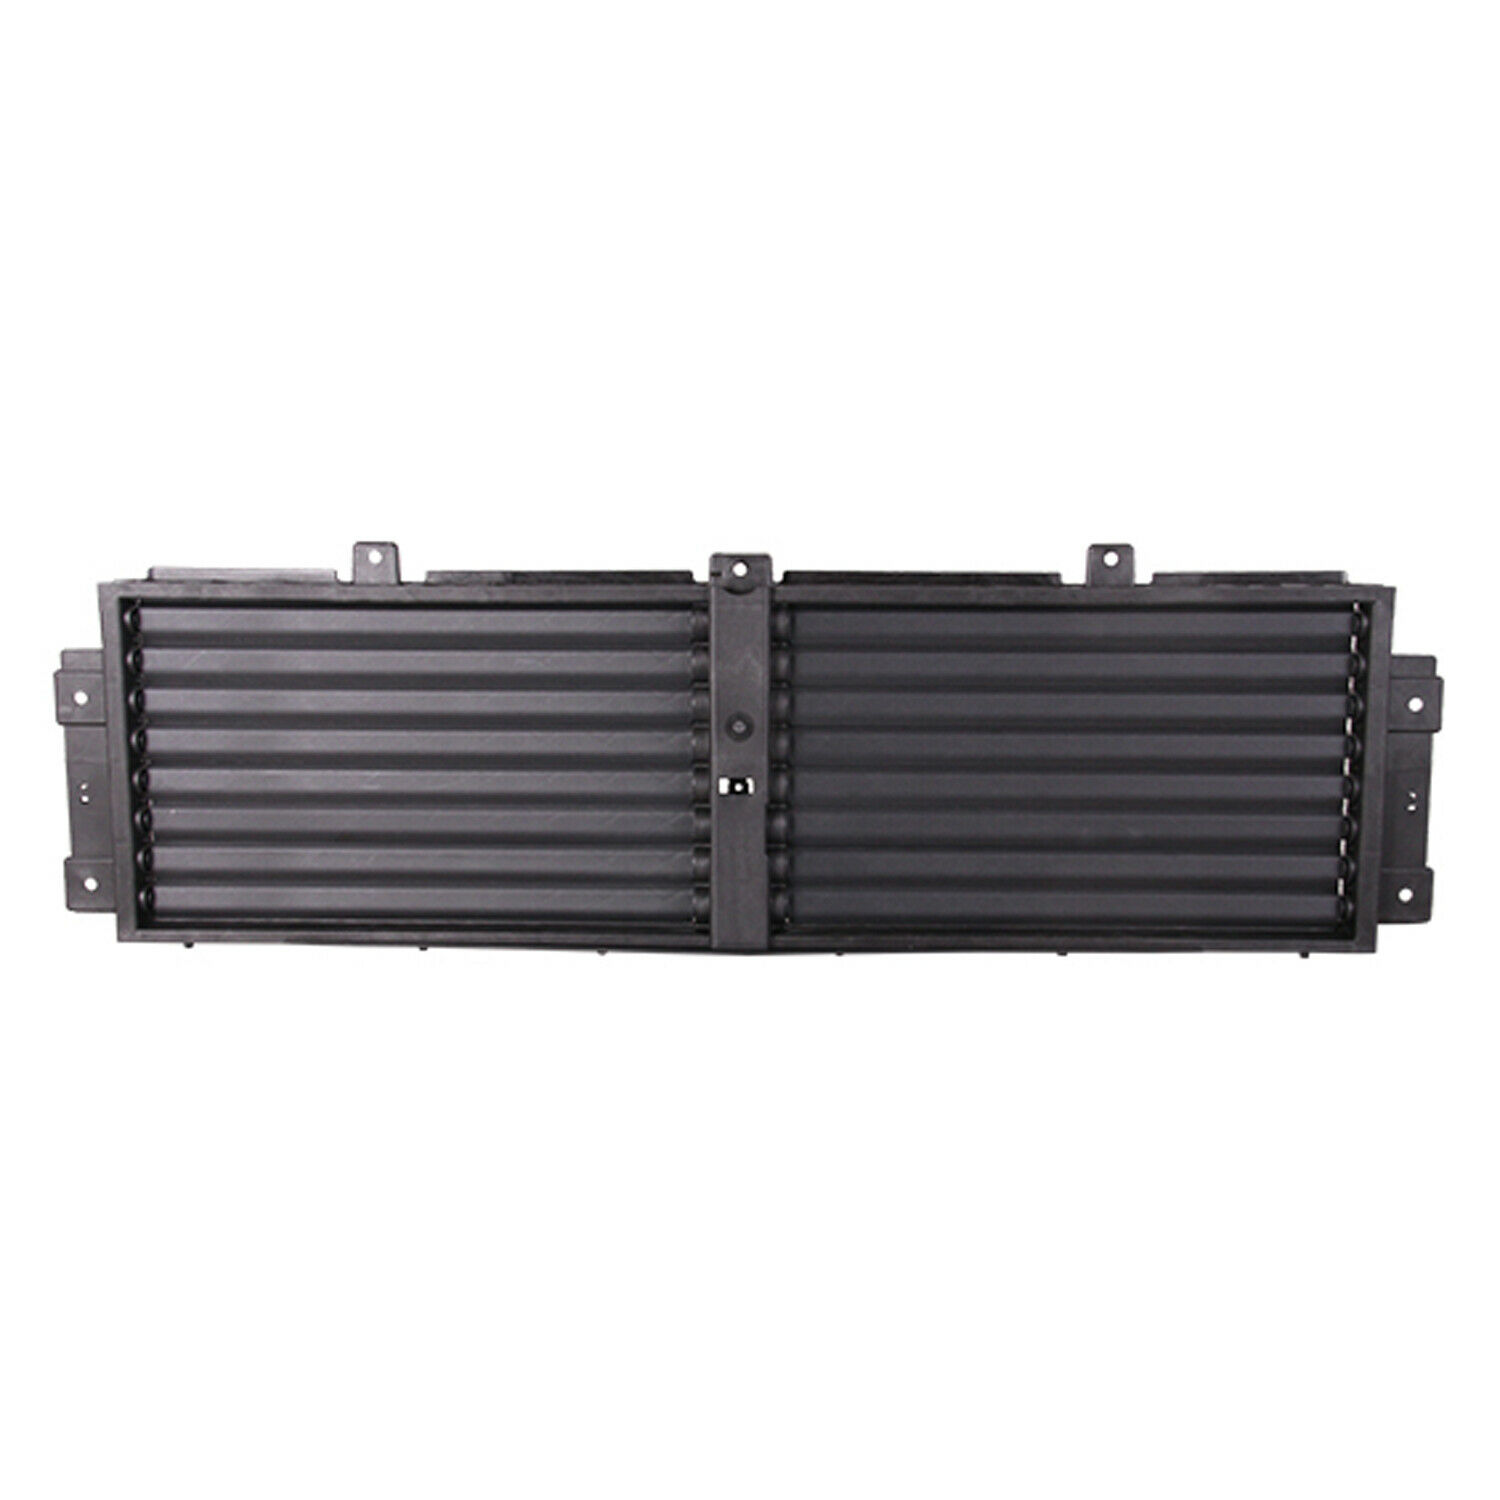 Aftermarket GRILLES for CHEVROLET - TRAVERSE, TRAVERSE,18-20,Grille air intake assy